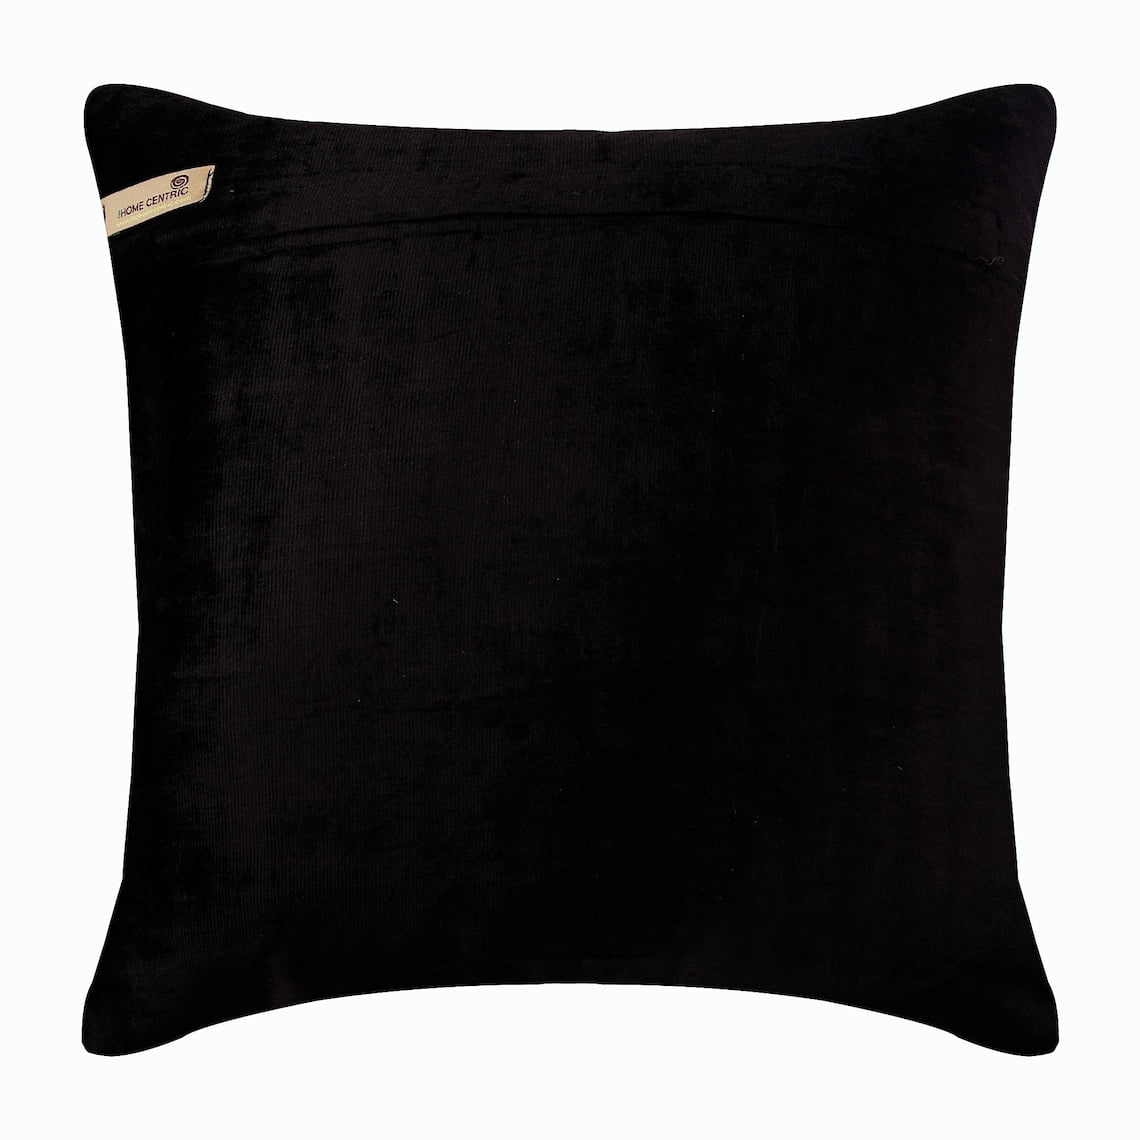 Cotton Big sofa Cushion, For Home & Hotel, Size: 60x60 Cm (24 X 24 Inches)